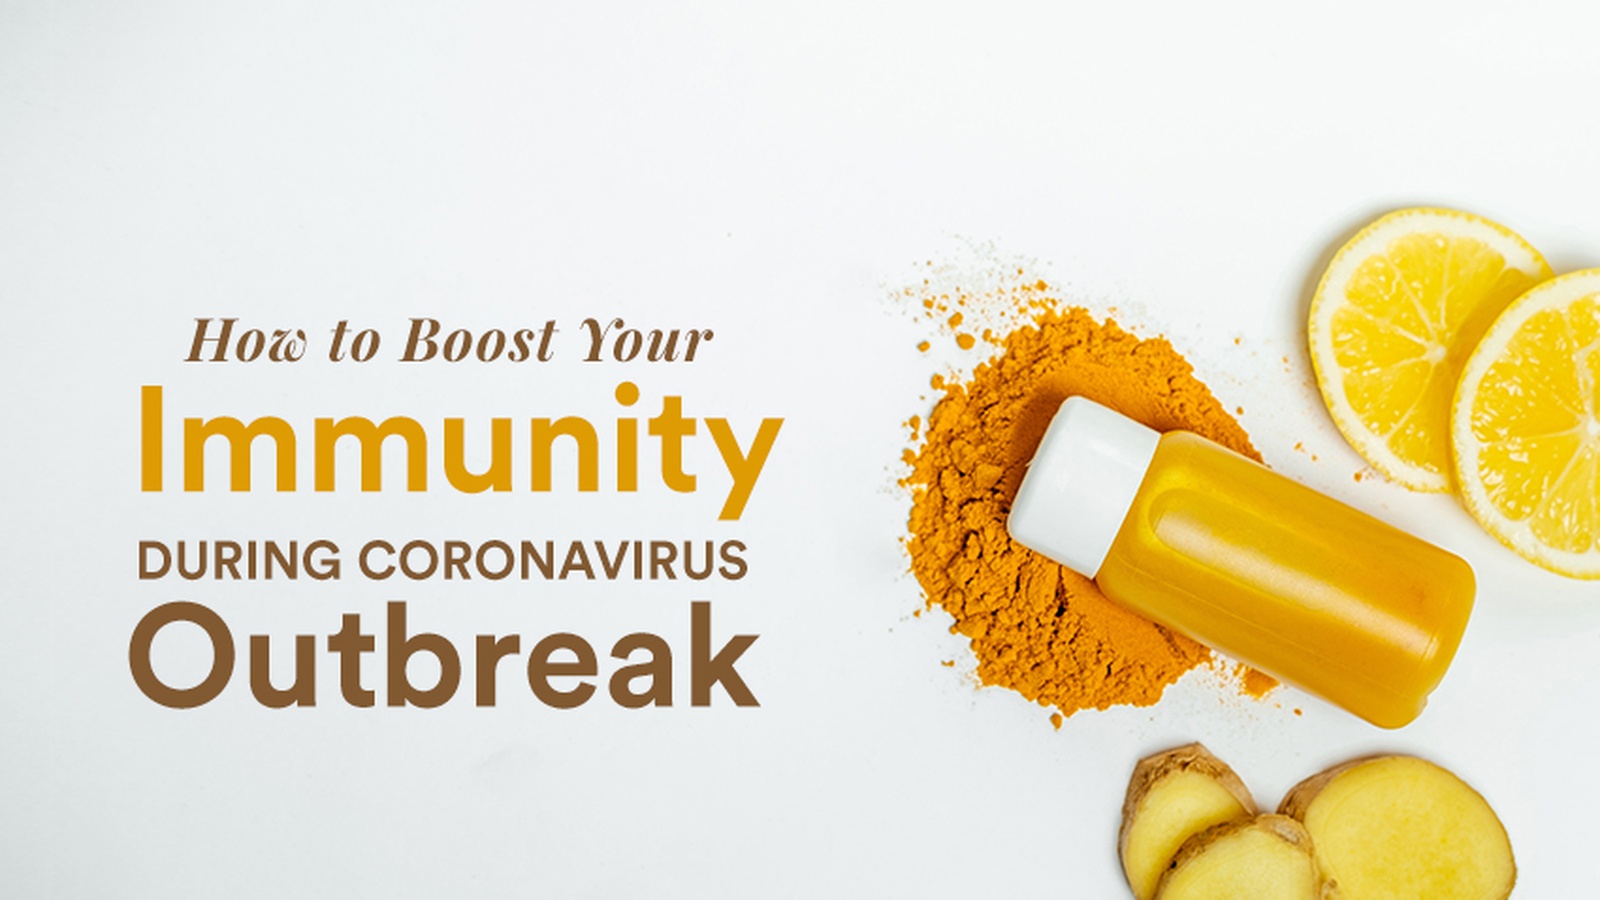 How to Boost Your Immunity During Coronavirus Outbreak